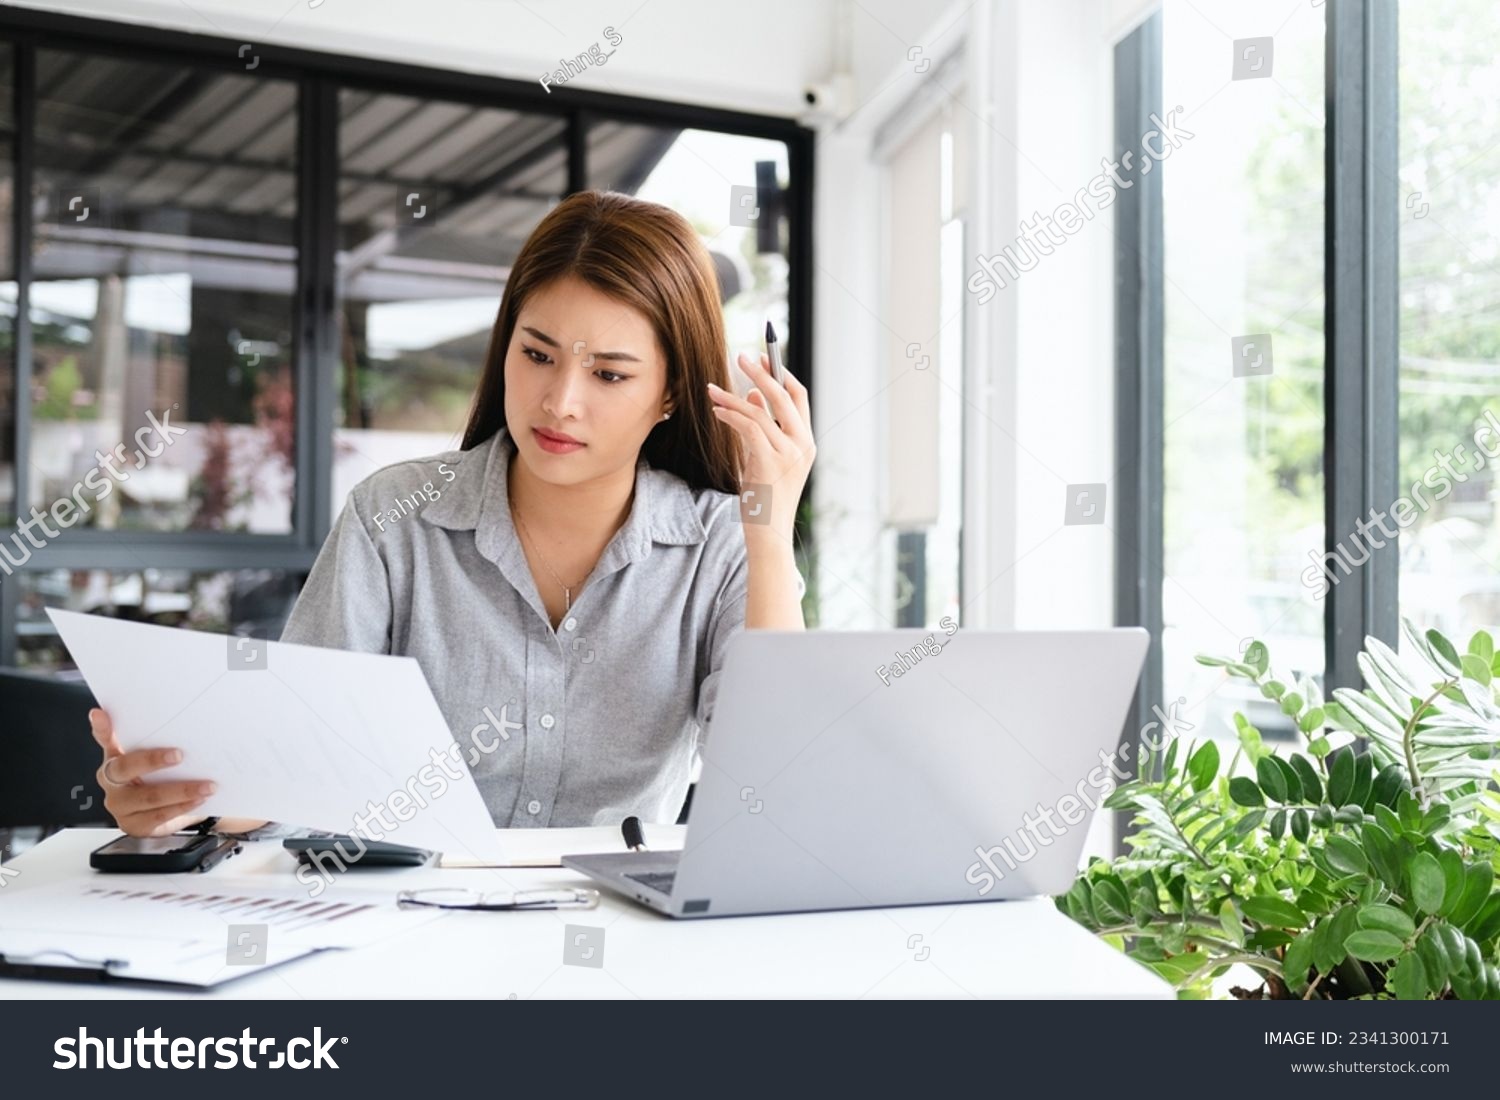 Young thoughtful Asian business woman executive manager wearing shirt working in modern office, taking notes and thinking of professional plan, project management, considering new business ideas. #2341300171